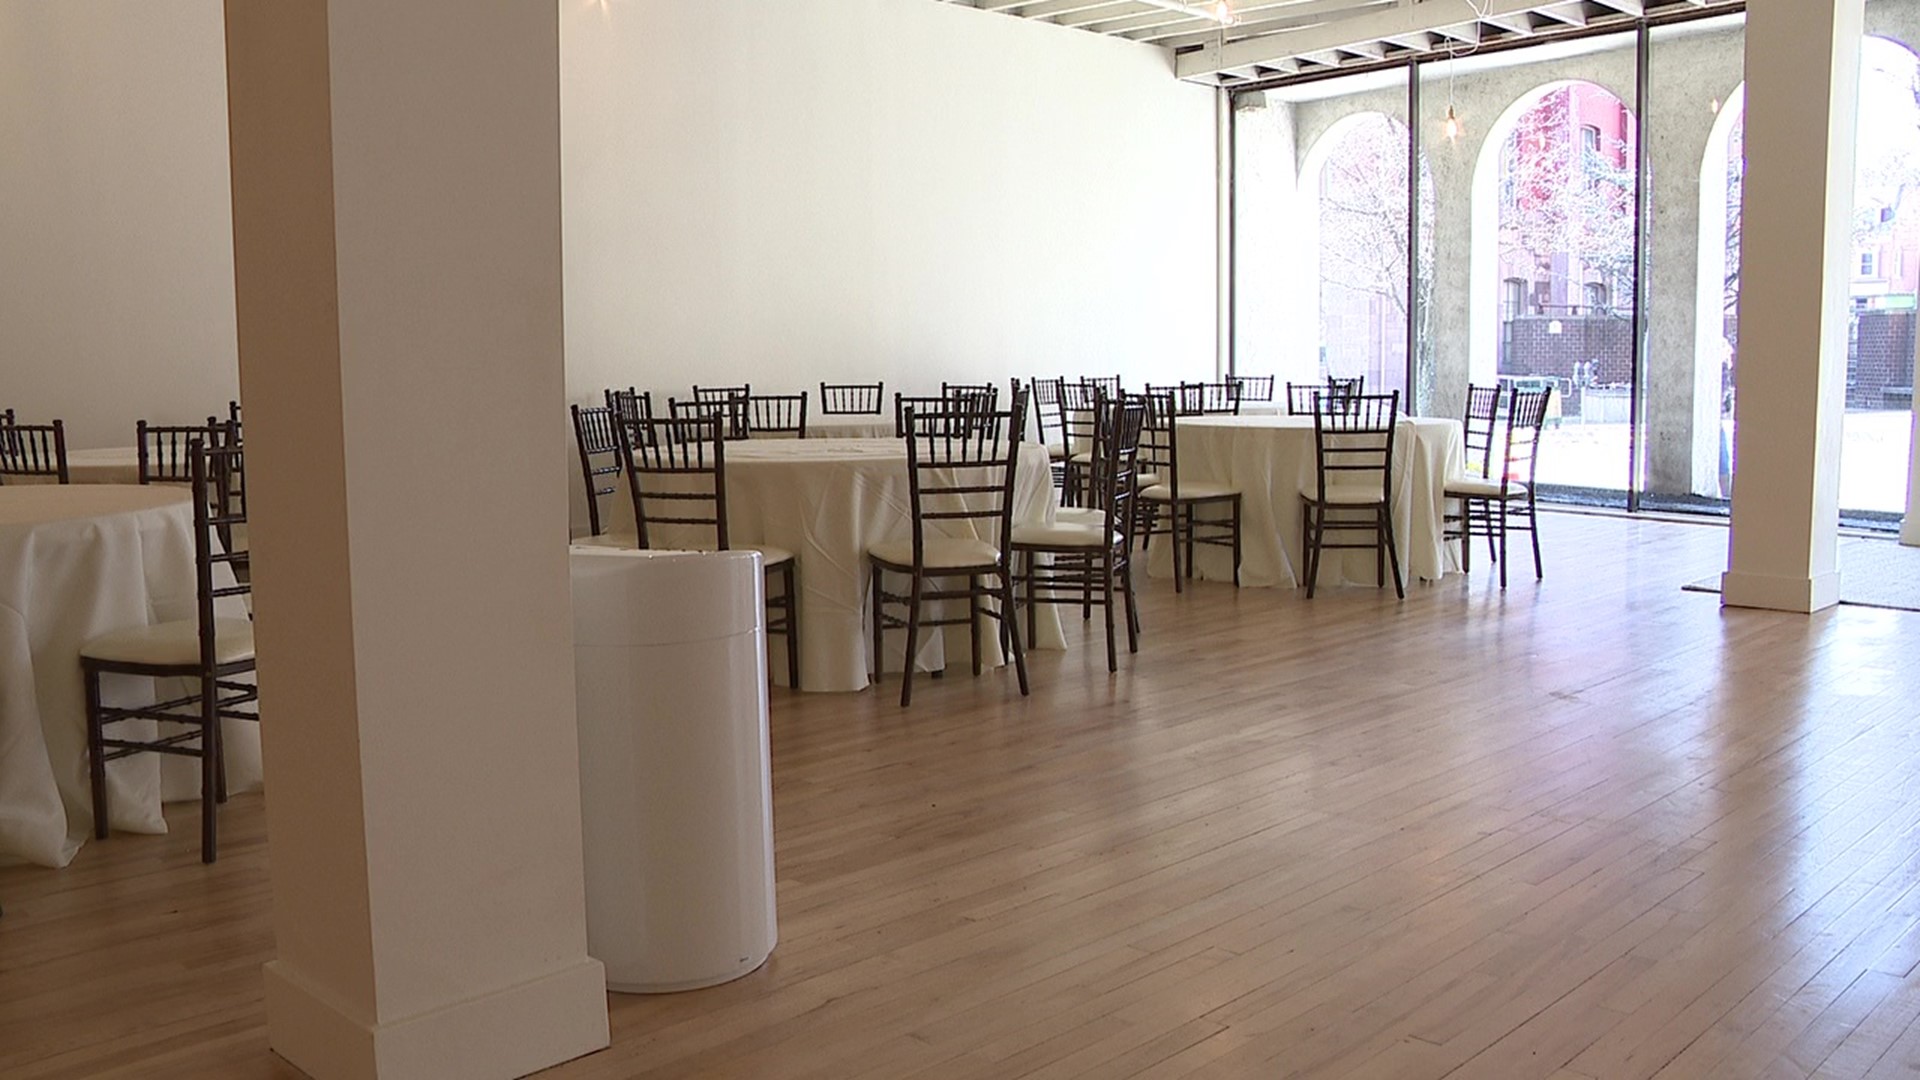 A vacant building in Pottsville from the 1950s has been transformed into a new event space.